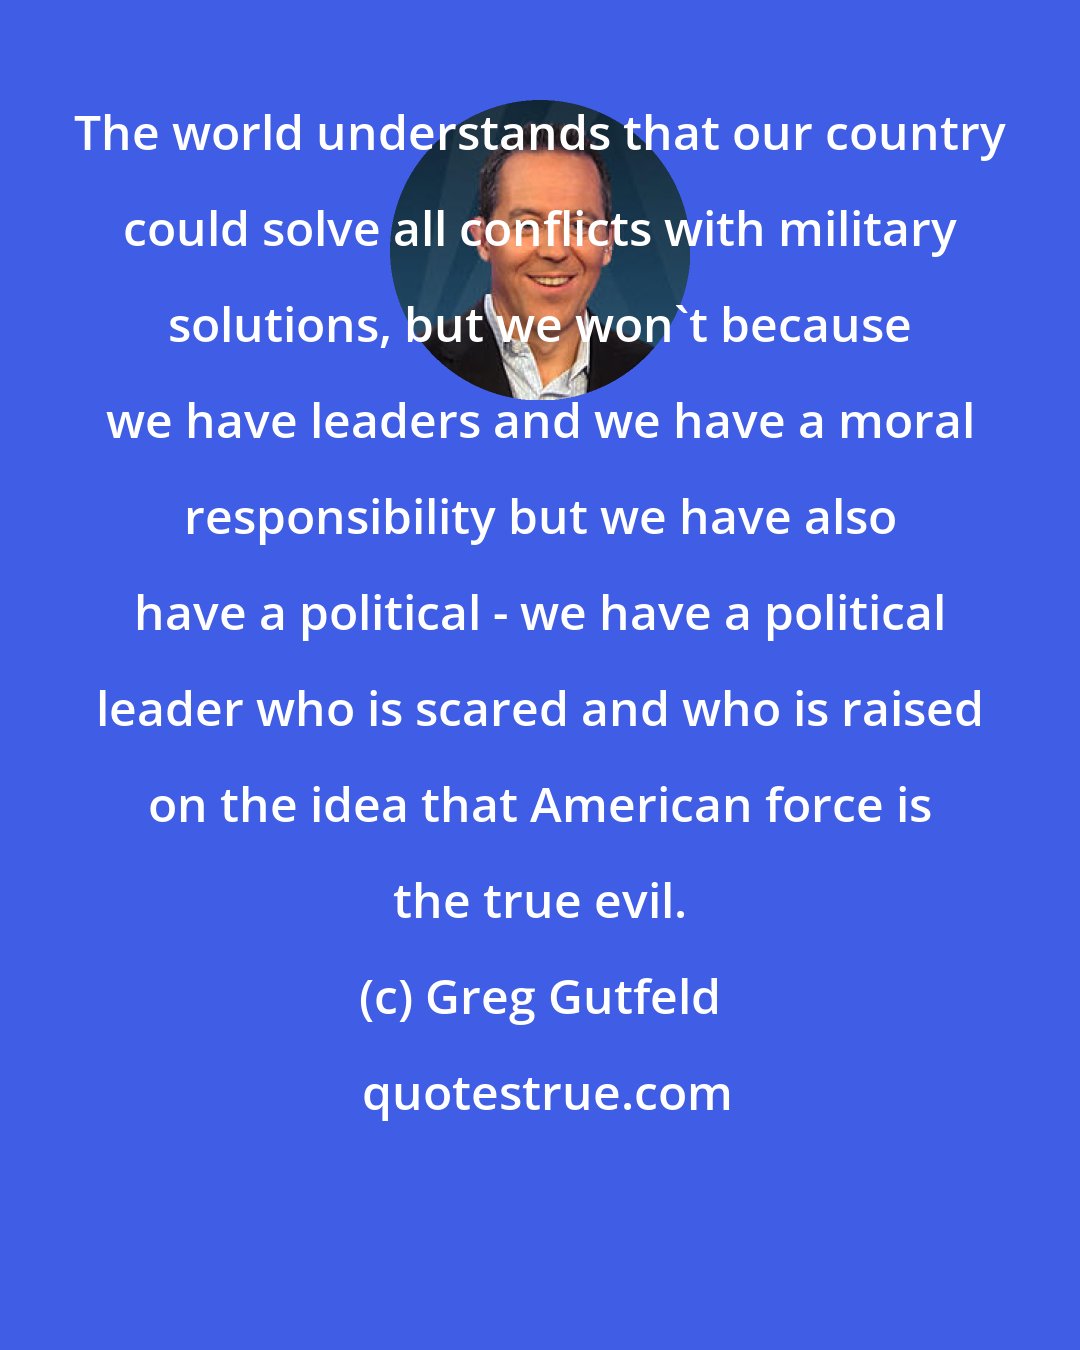 Greg Gutfeld: The world understands that our country could solve all conflicts with military solutions, but we won't because we have leaders and we have a moral responsibility but we have also have a political - we have a political leader who is scared and who is raised on the idea that American force is the true evil.